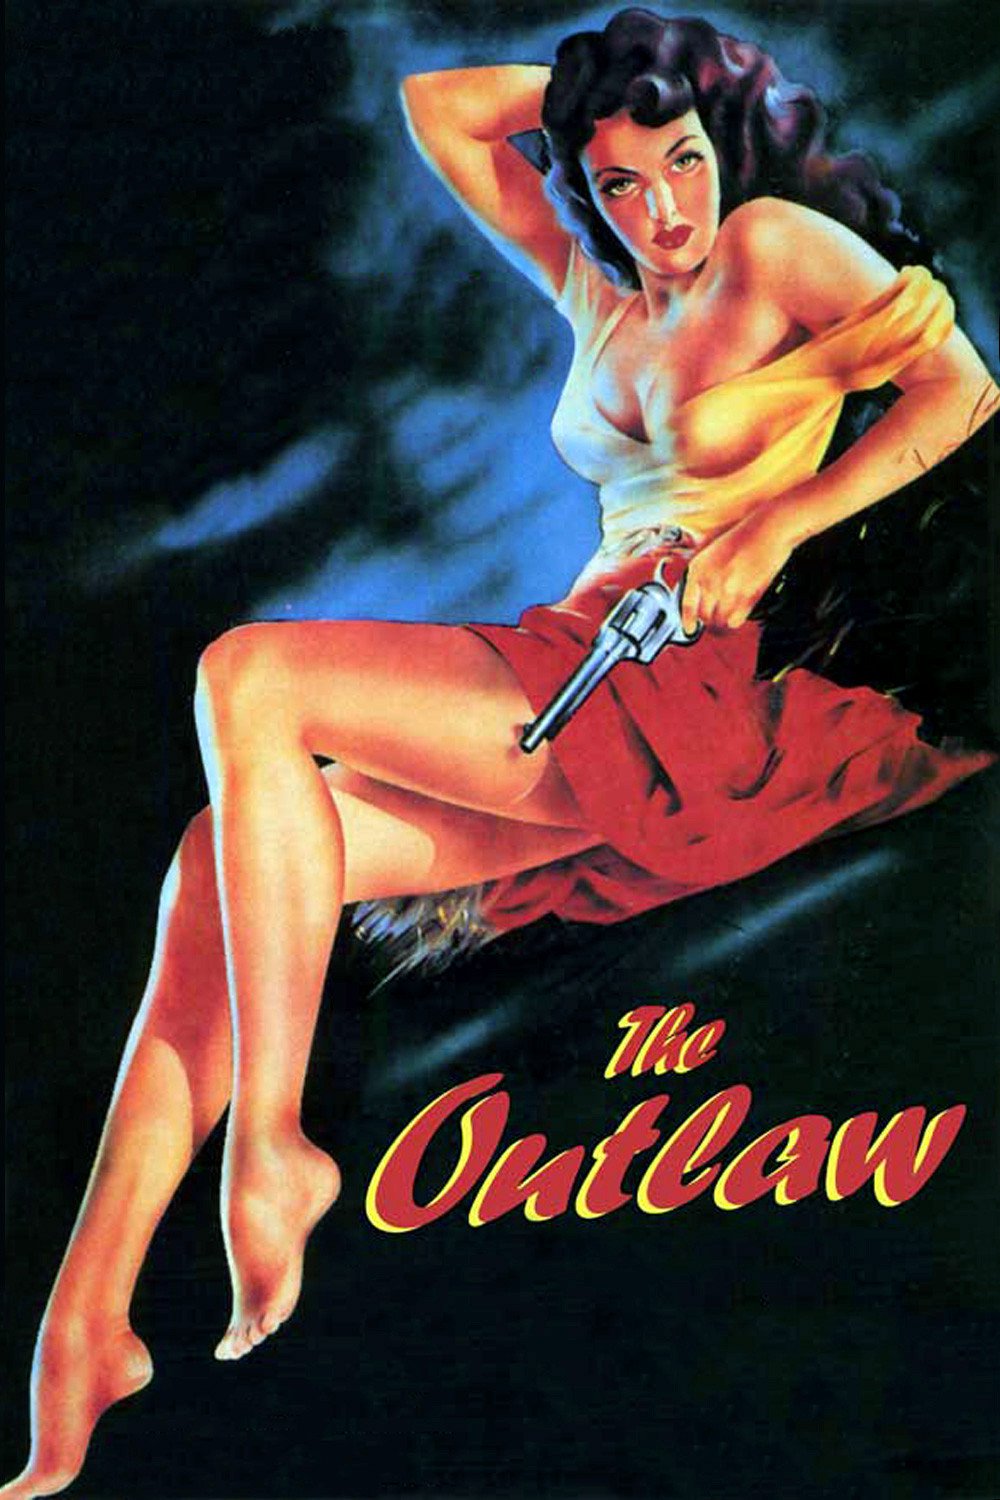 Poster for the movie "The Outlaw"